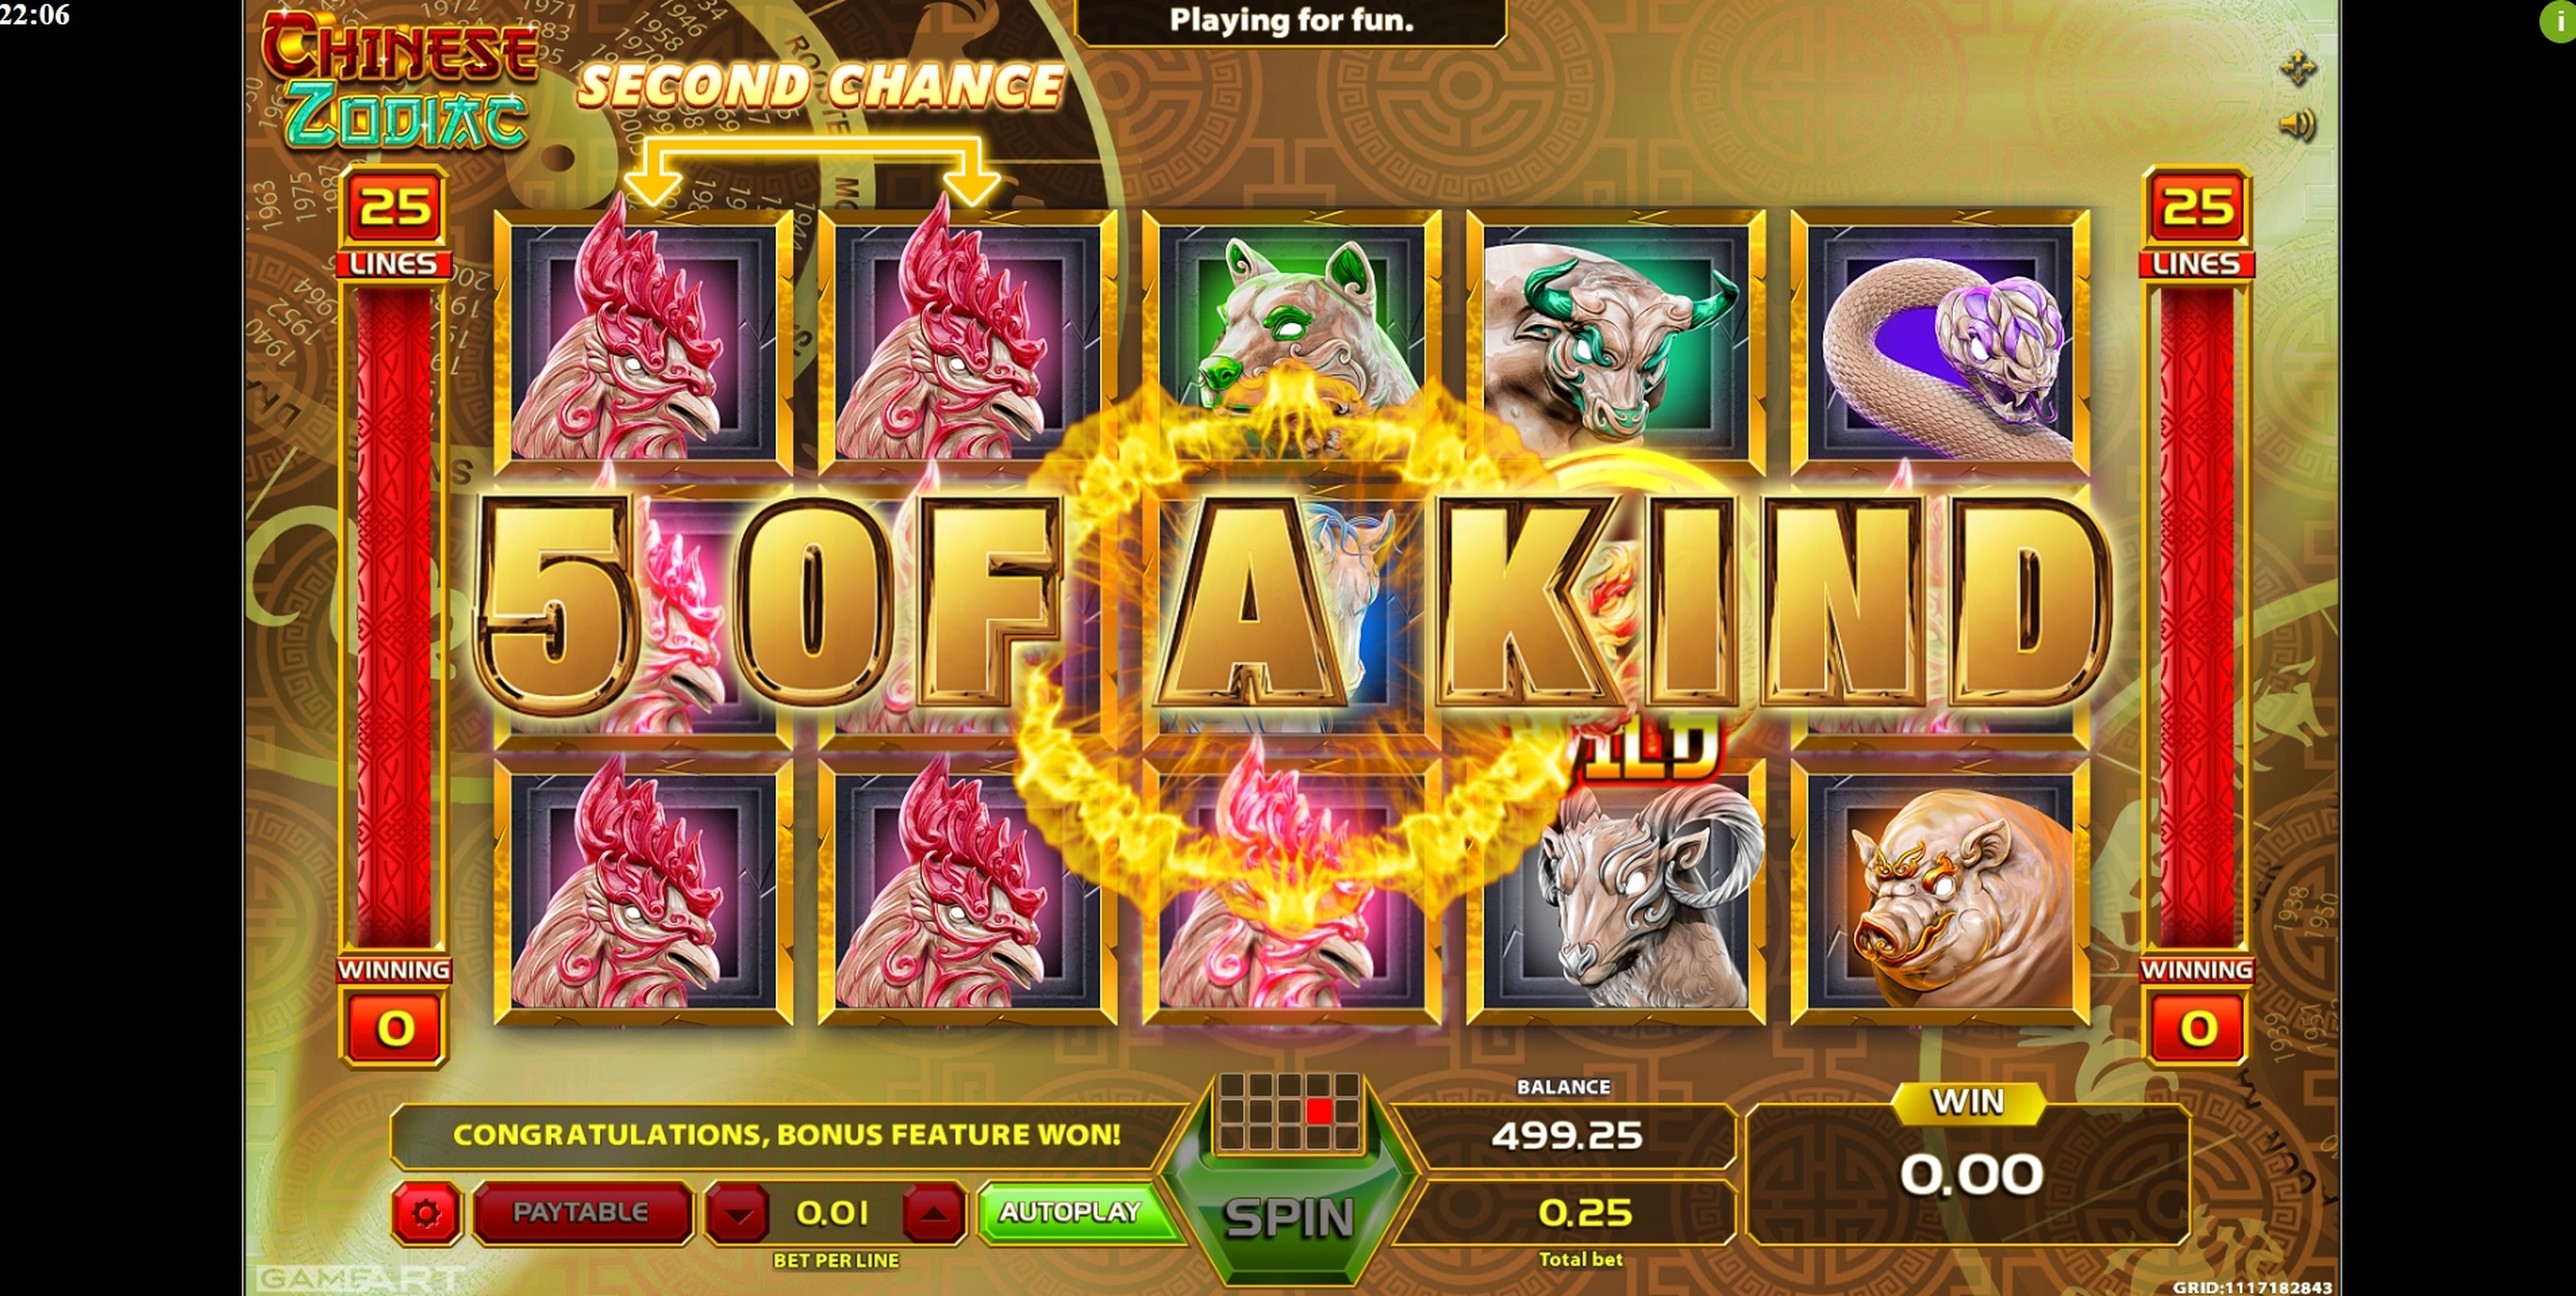 Win Money in Chinese Zodiac Free Slot Game by GameArt